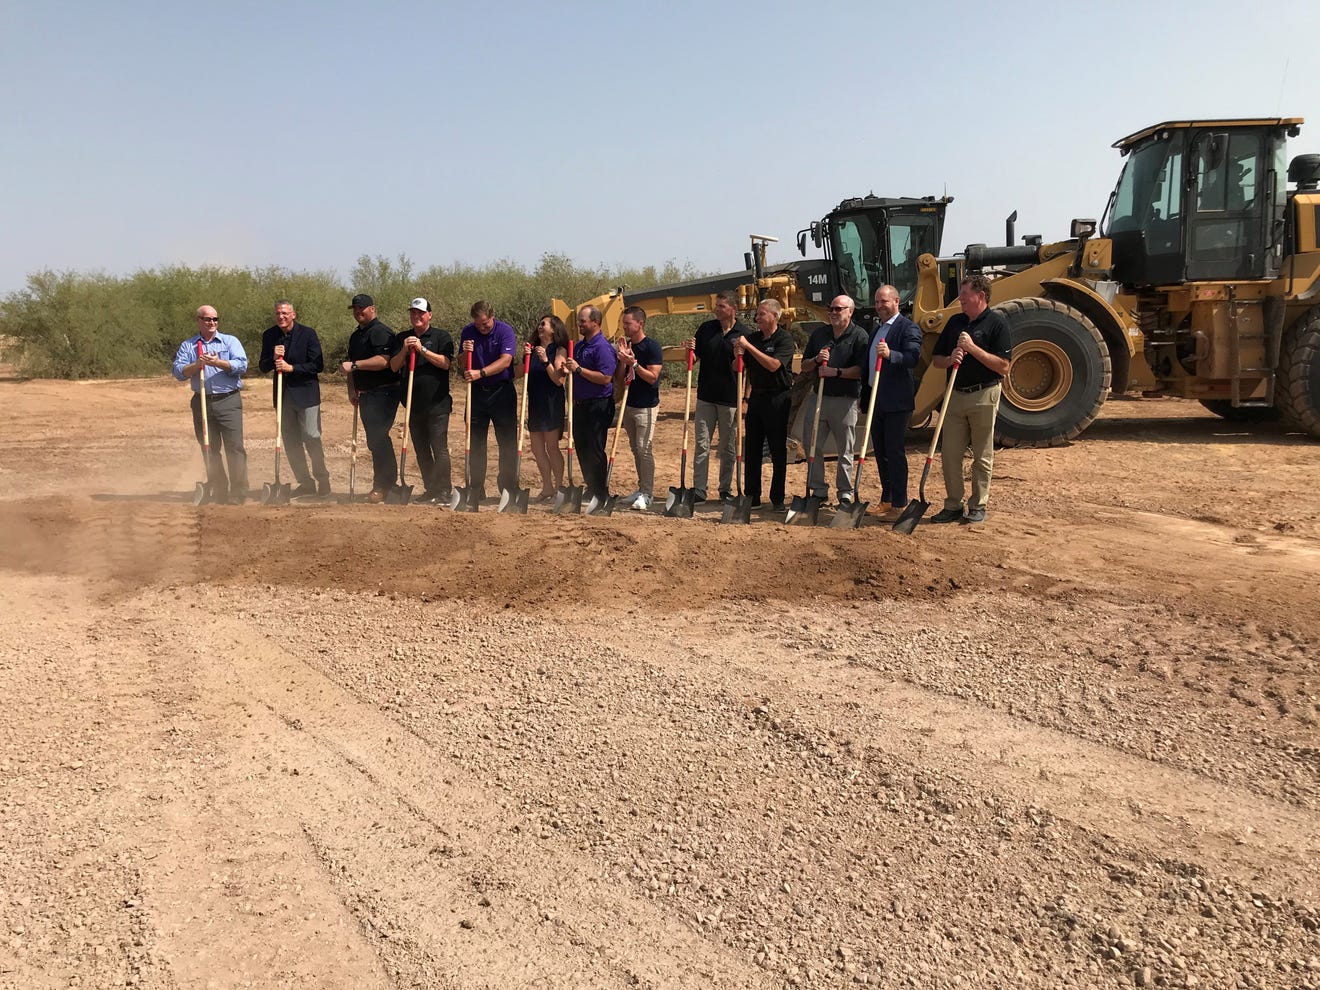 Legacy Sports Park breaks ground in Mesa - Rose Law Group Reporter